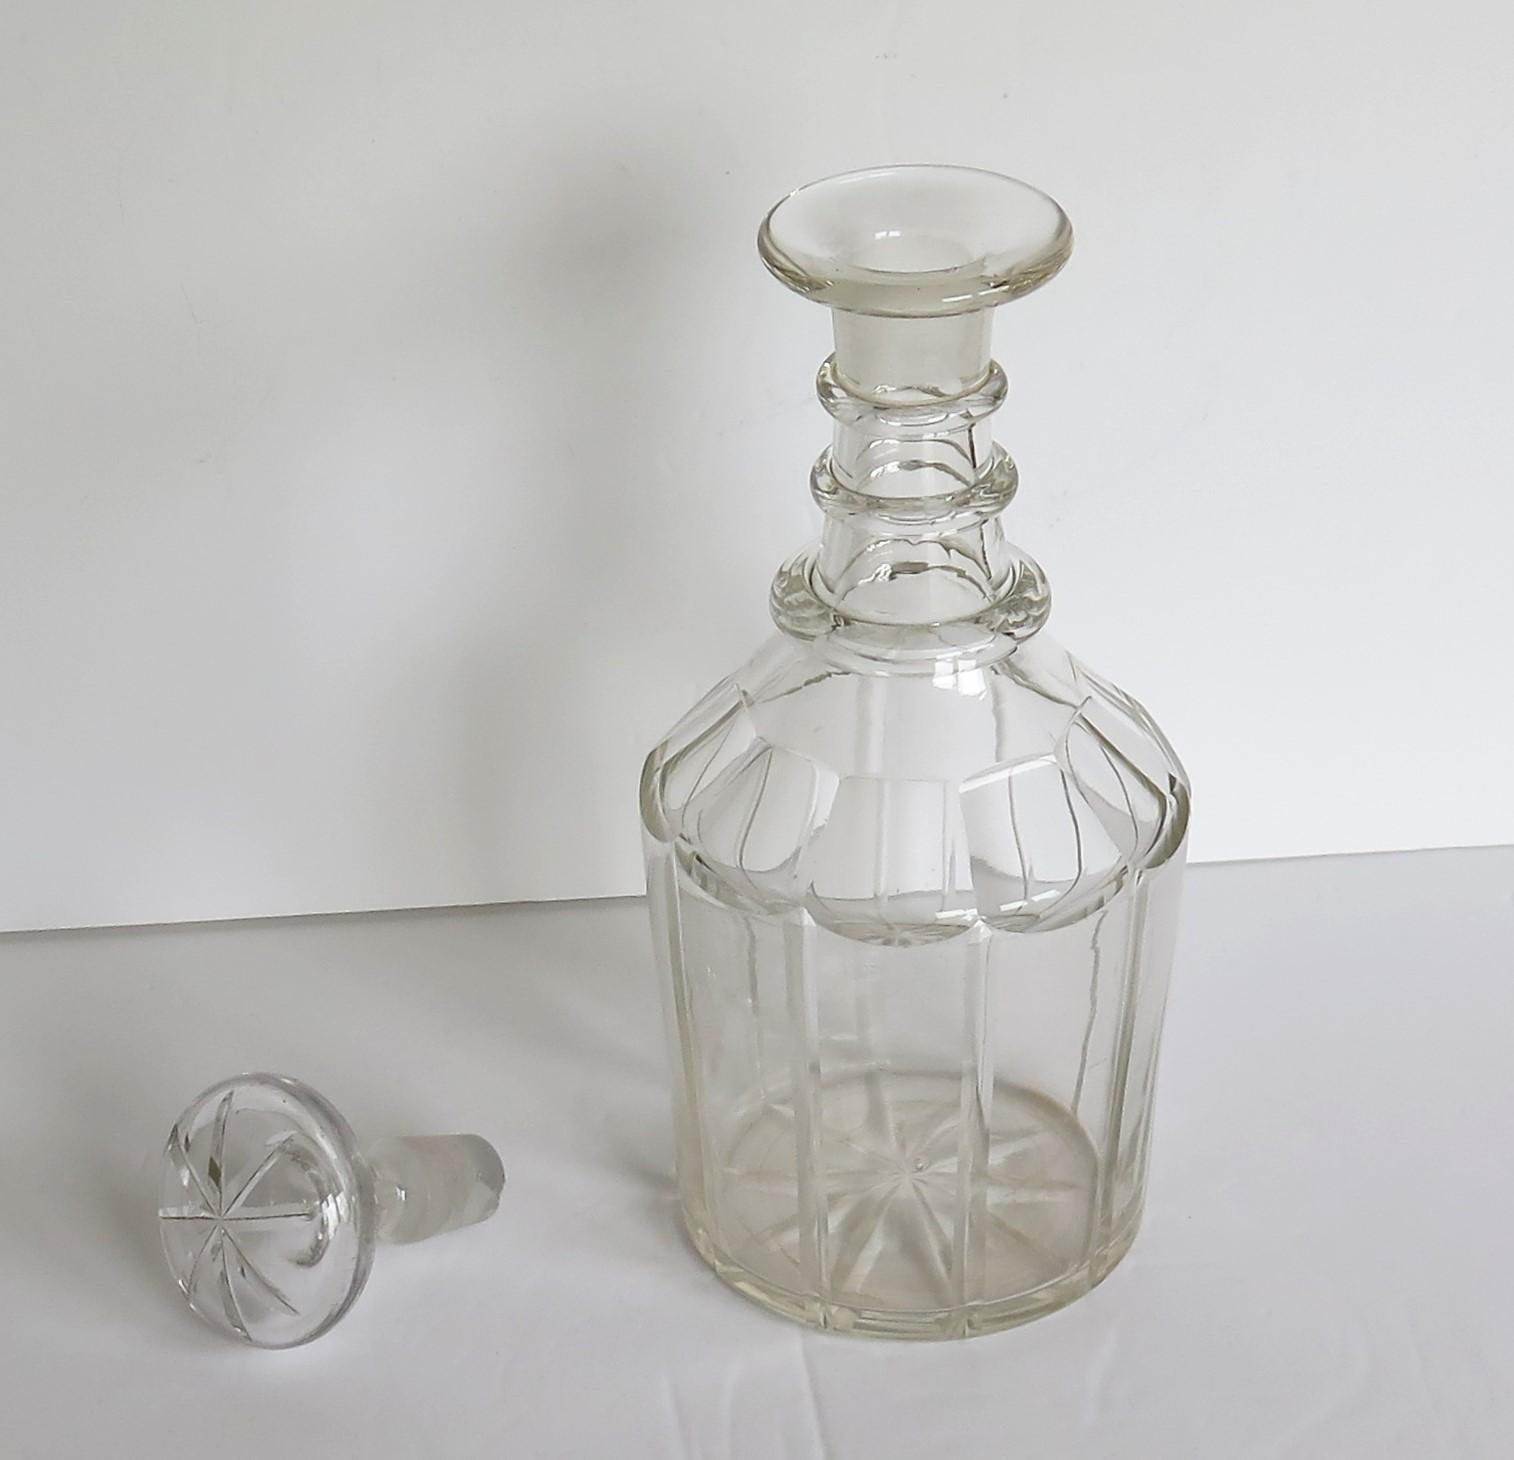 This is a good Anglo-Irish cut-glass or crystal decanter made early in the 19th century, circa 1815, during the English Regency, late Georgian period.

The decanter is nominally straight sided and is beautifully cut in ten broad vertical columns